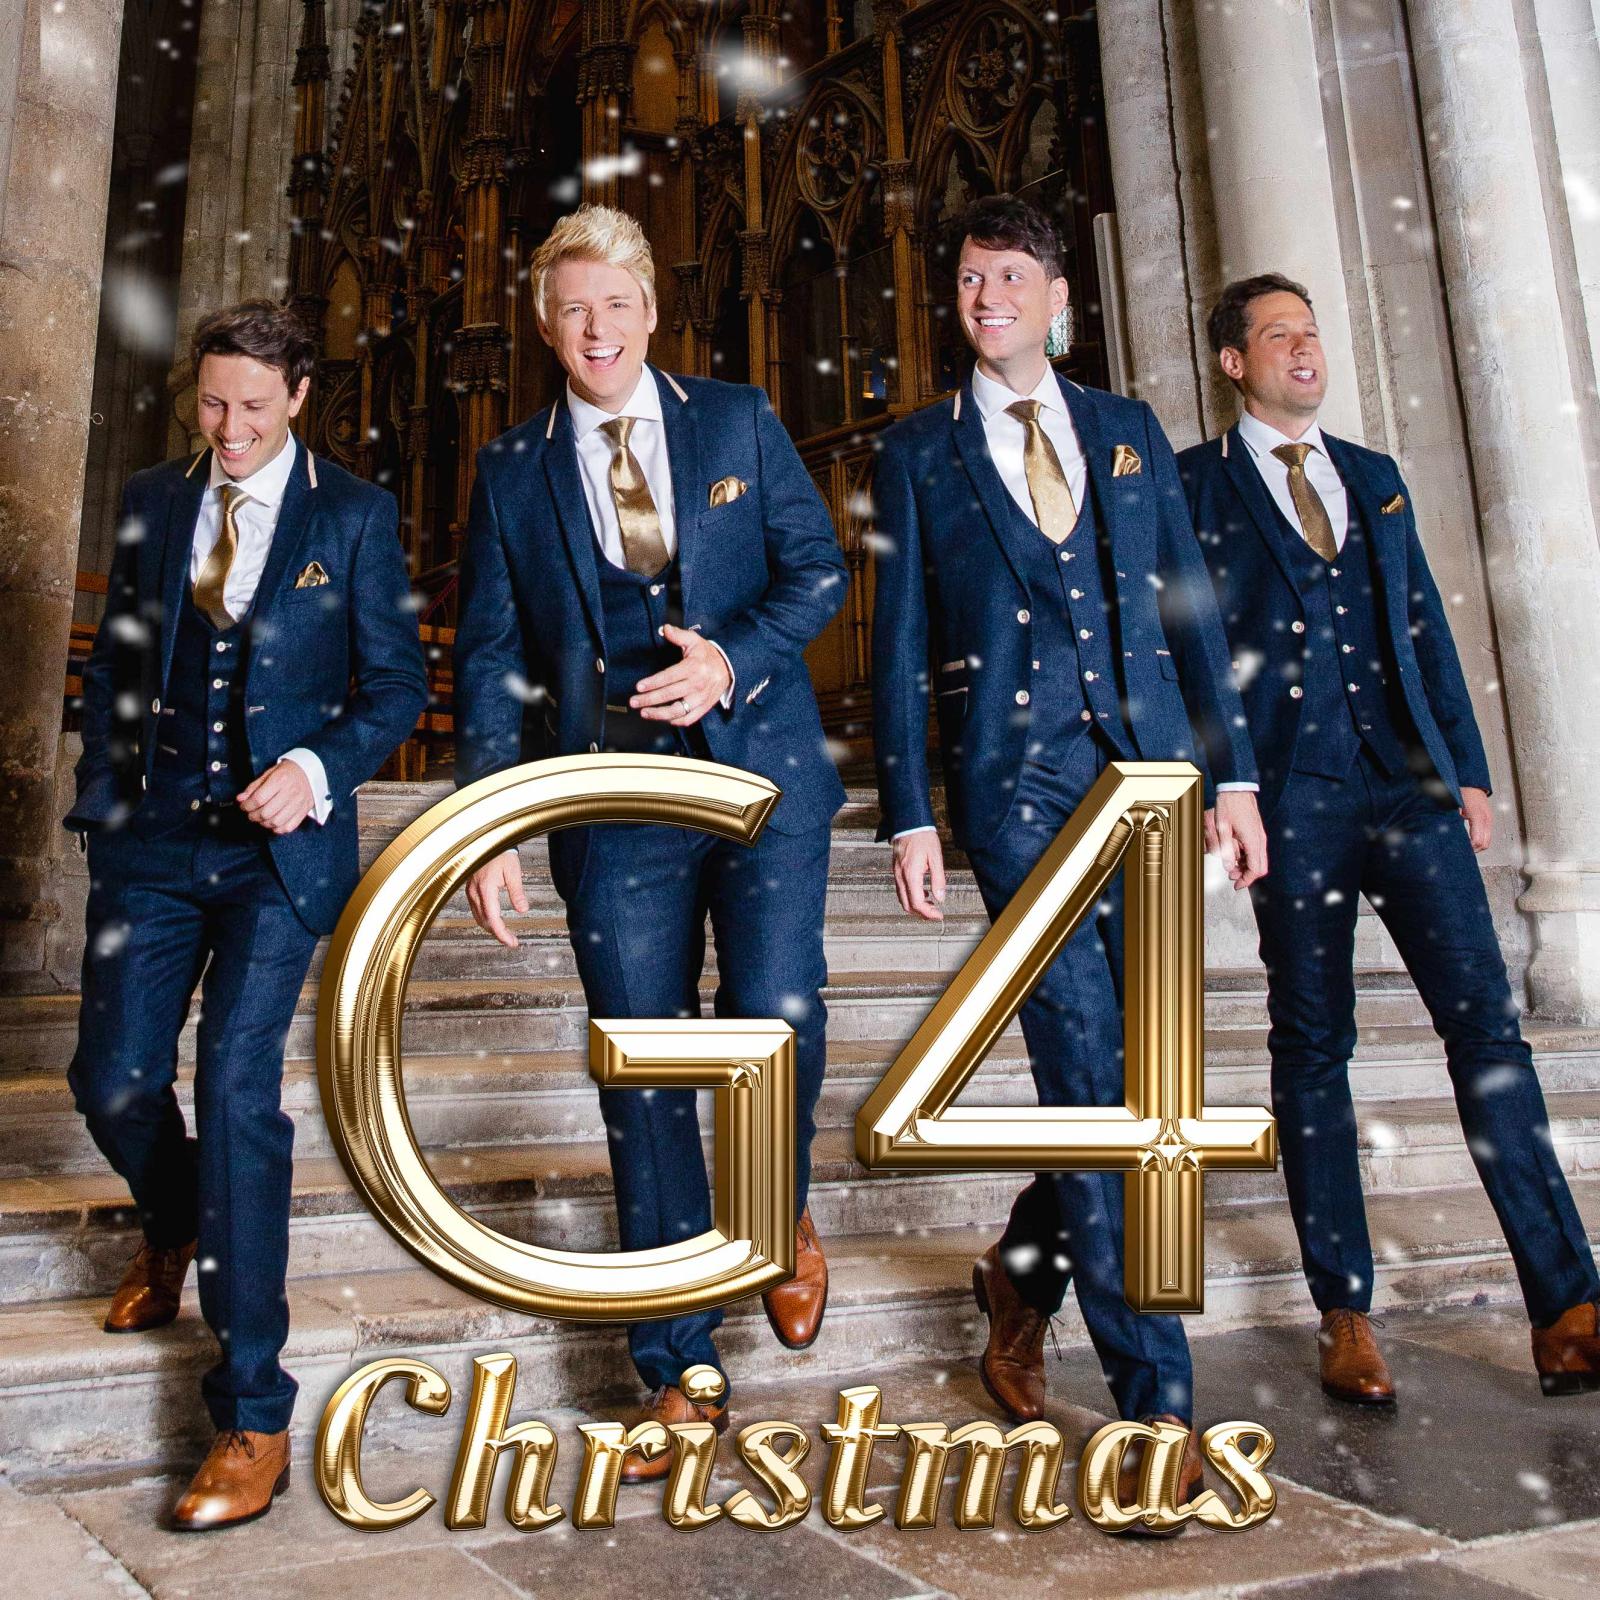 G4 concert graphic featuring the G4 logo & 4 men walking out of an old doorway to another Cathedral. Image features a flocked snow effect.